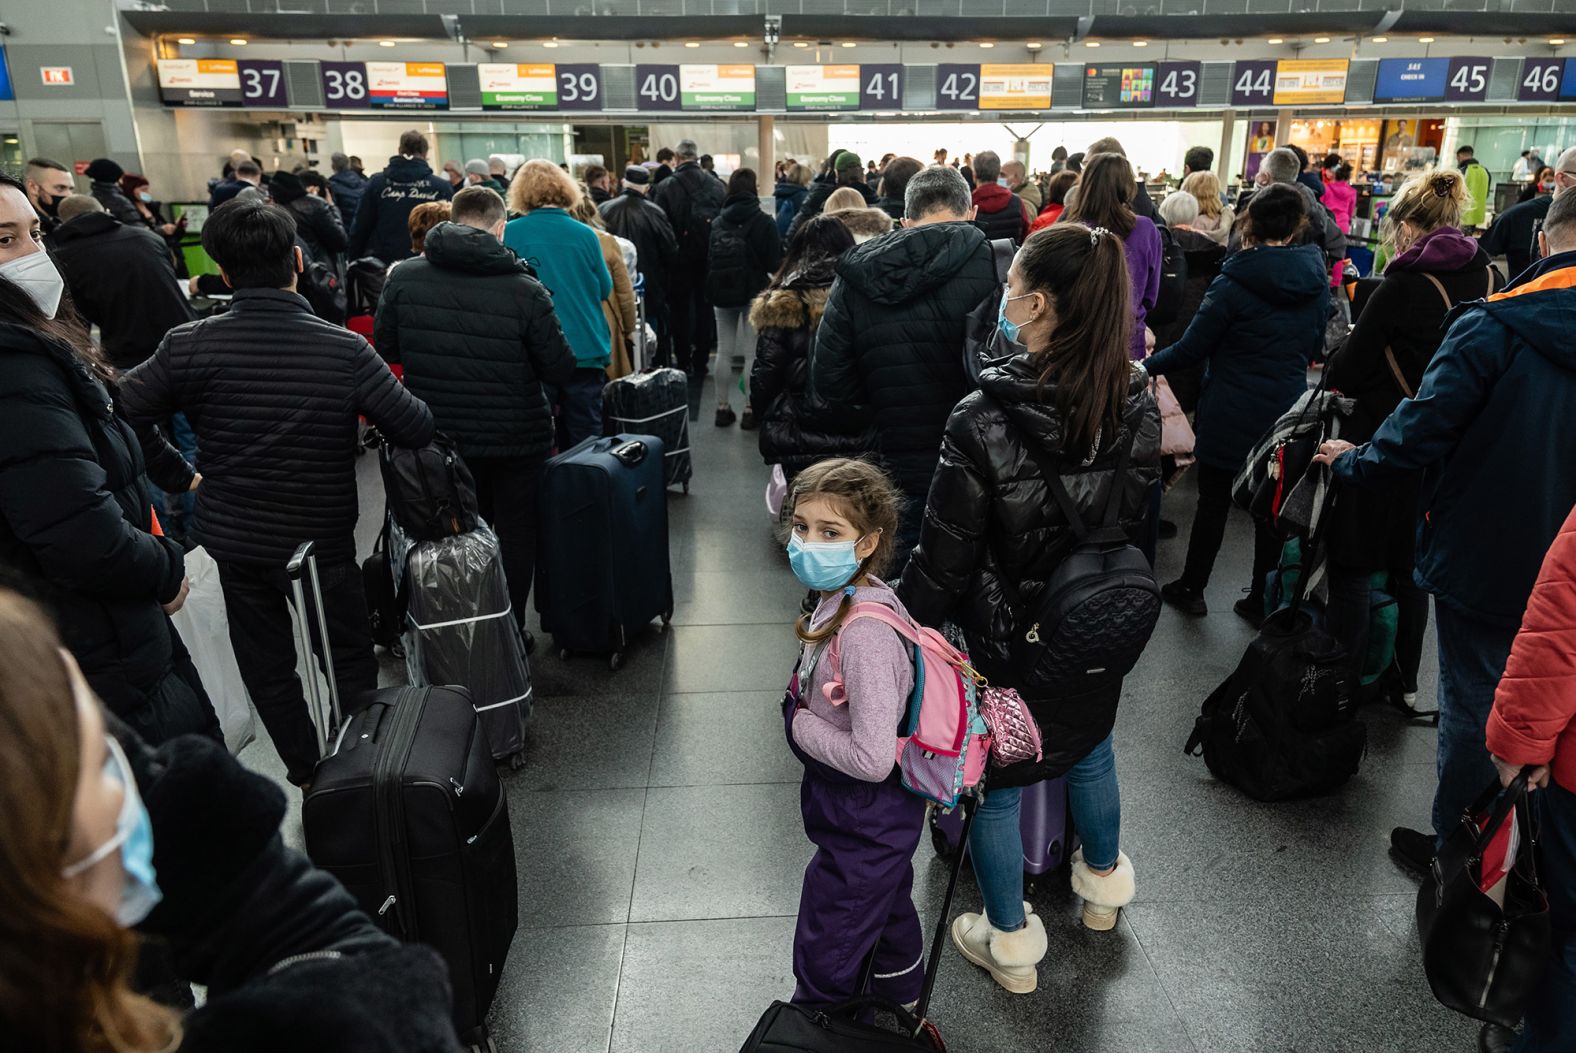 Travelers wait in line to check in to their departing flights February 15 at the Boryspil International Airport outside Kyiv. US President Joe Biden<a href="index.php?page=&url=https%3A%2F%2Fwww.cnn.com%2F2022%2F02%2F10%2Fpolitics%2Fbiden-ukraine-things-could-go-crazy%2Findex.html" target="_blank"> urged Americans in Ukraine to leave the country,</a> warning that "things could go crazy quickly" in the region.